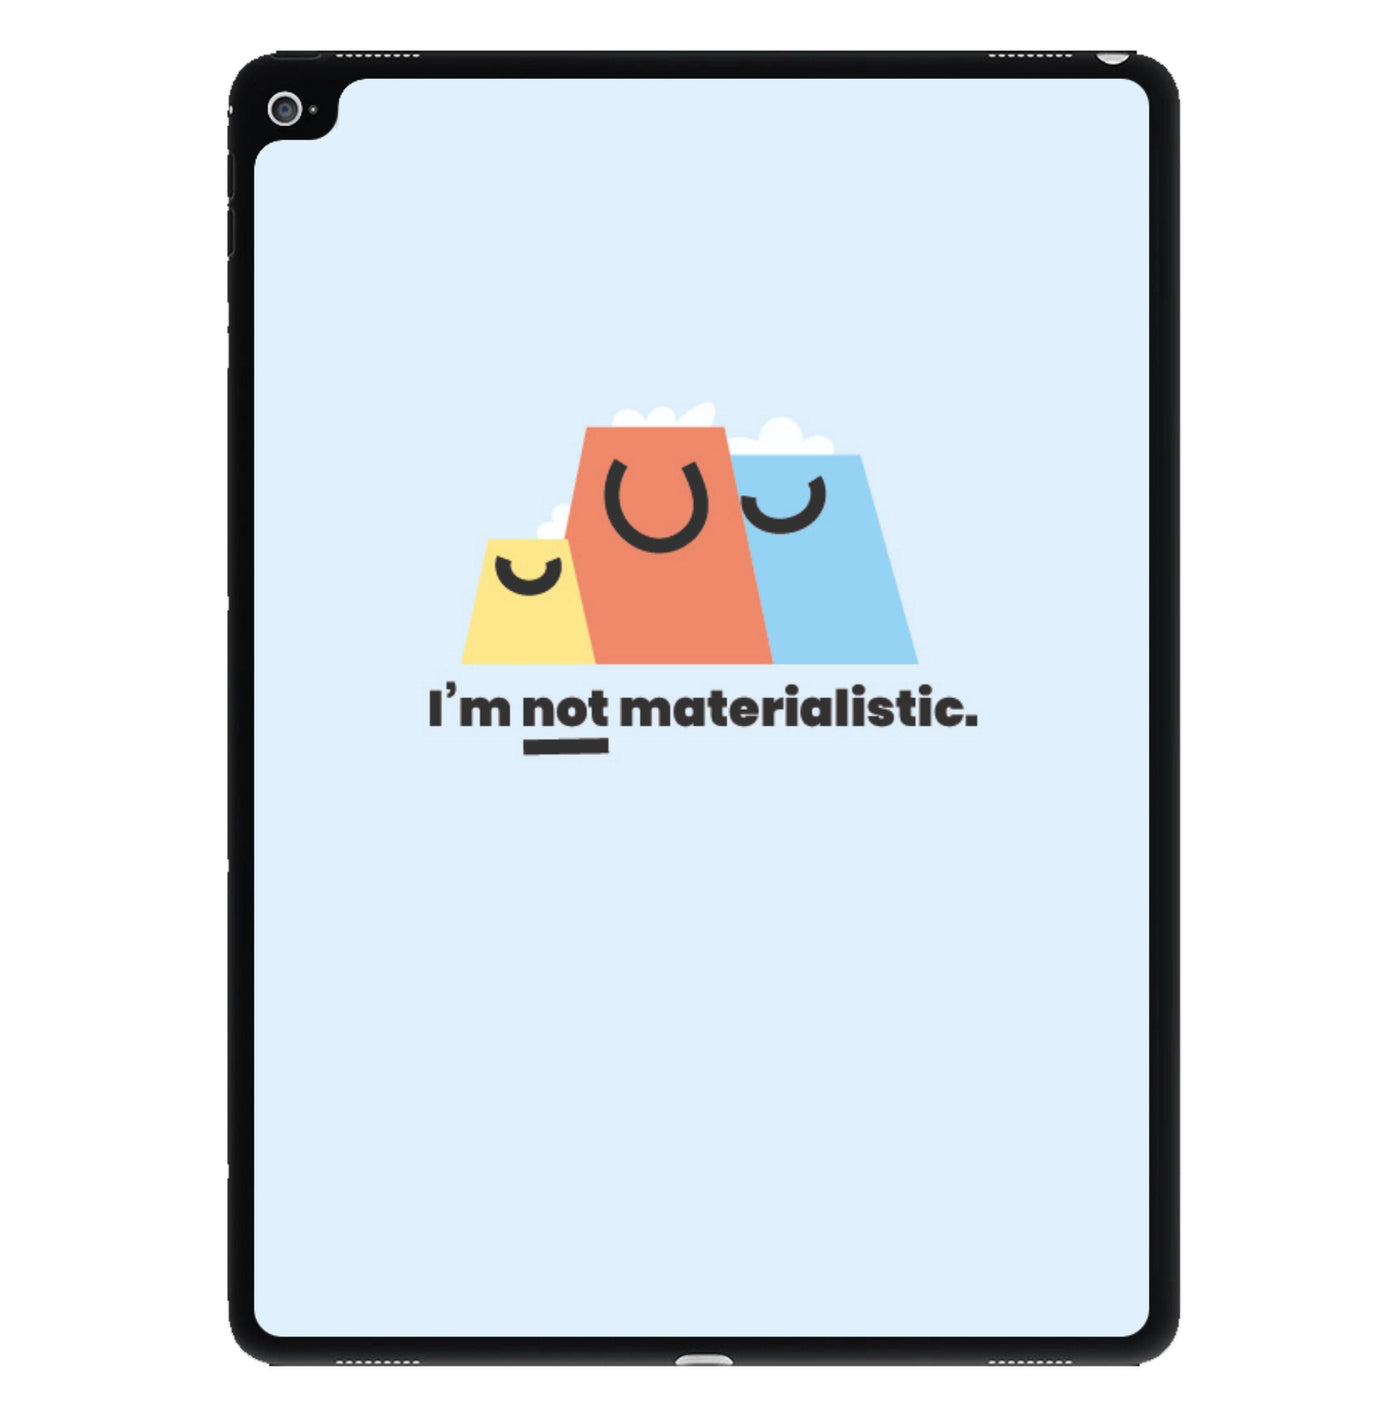 I'm not materialistic - Kylie Jenner iPad Case